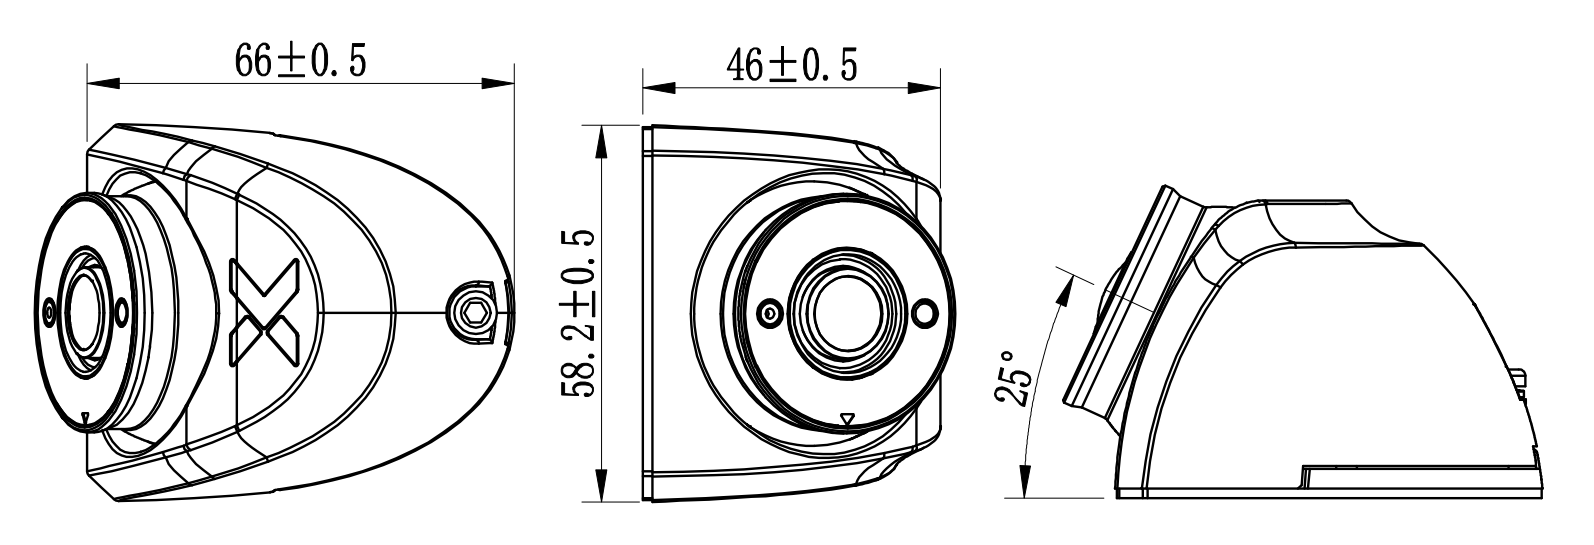 Illustration Showing AEX-ST-VMC-C39S External 1080P Mini Side View Camera Dimensions of 66mm Length, 58.2mm Width and 46mm Height